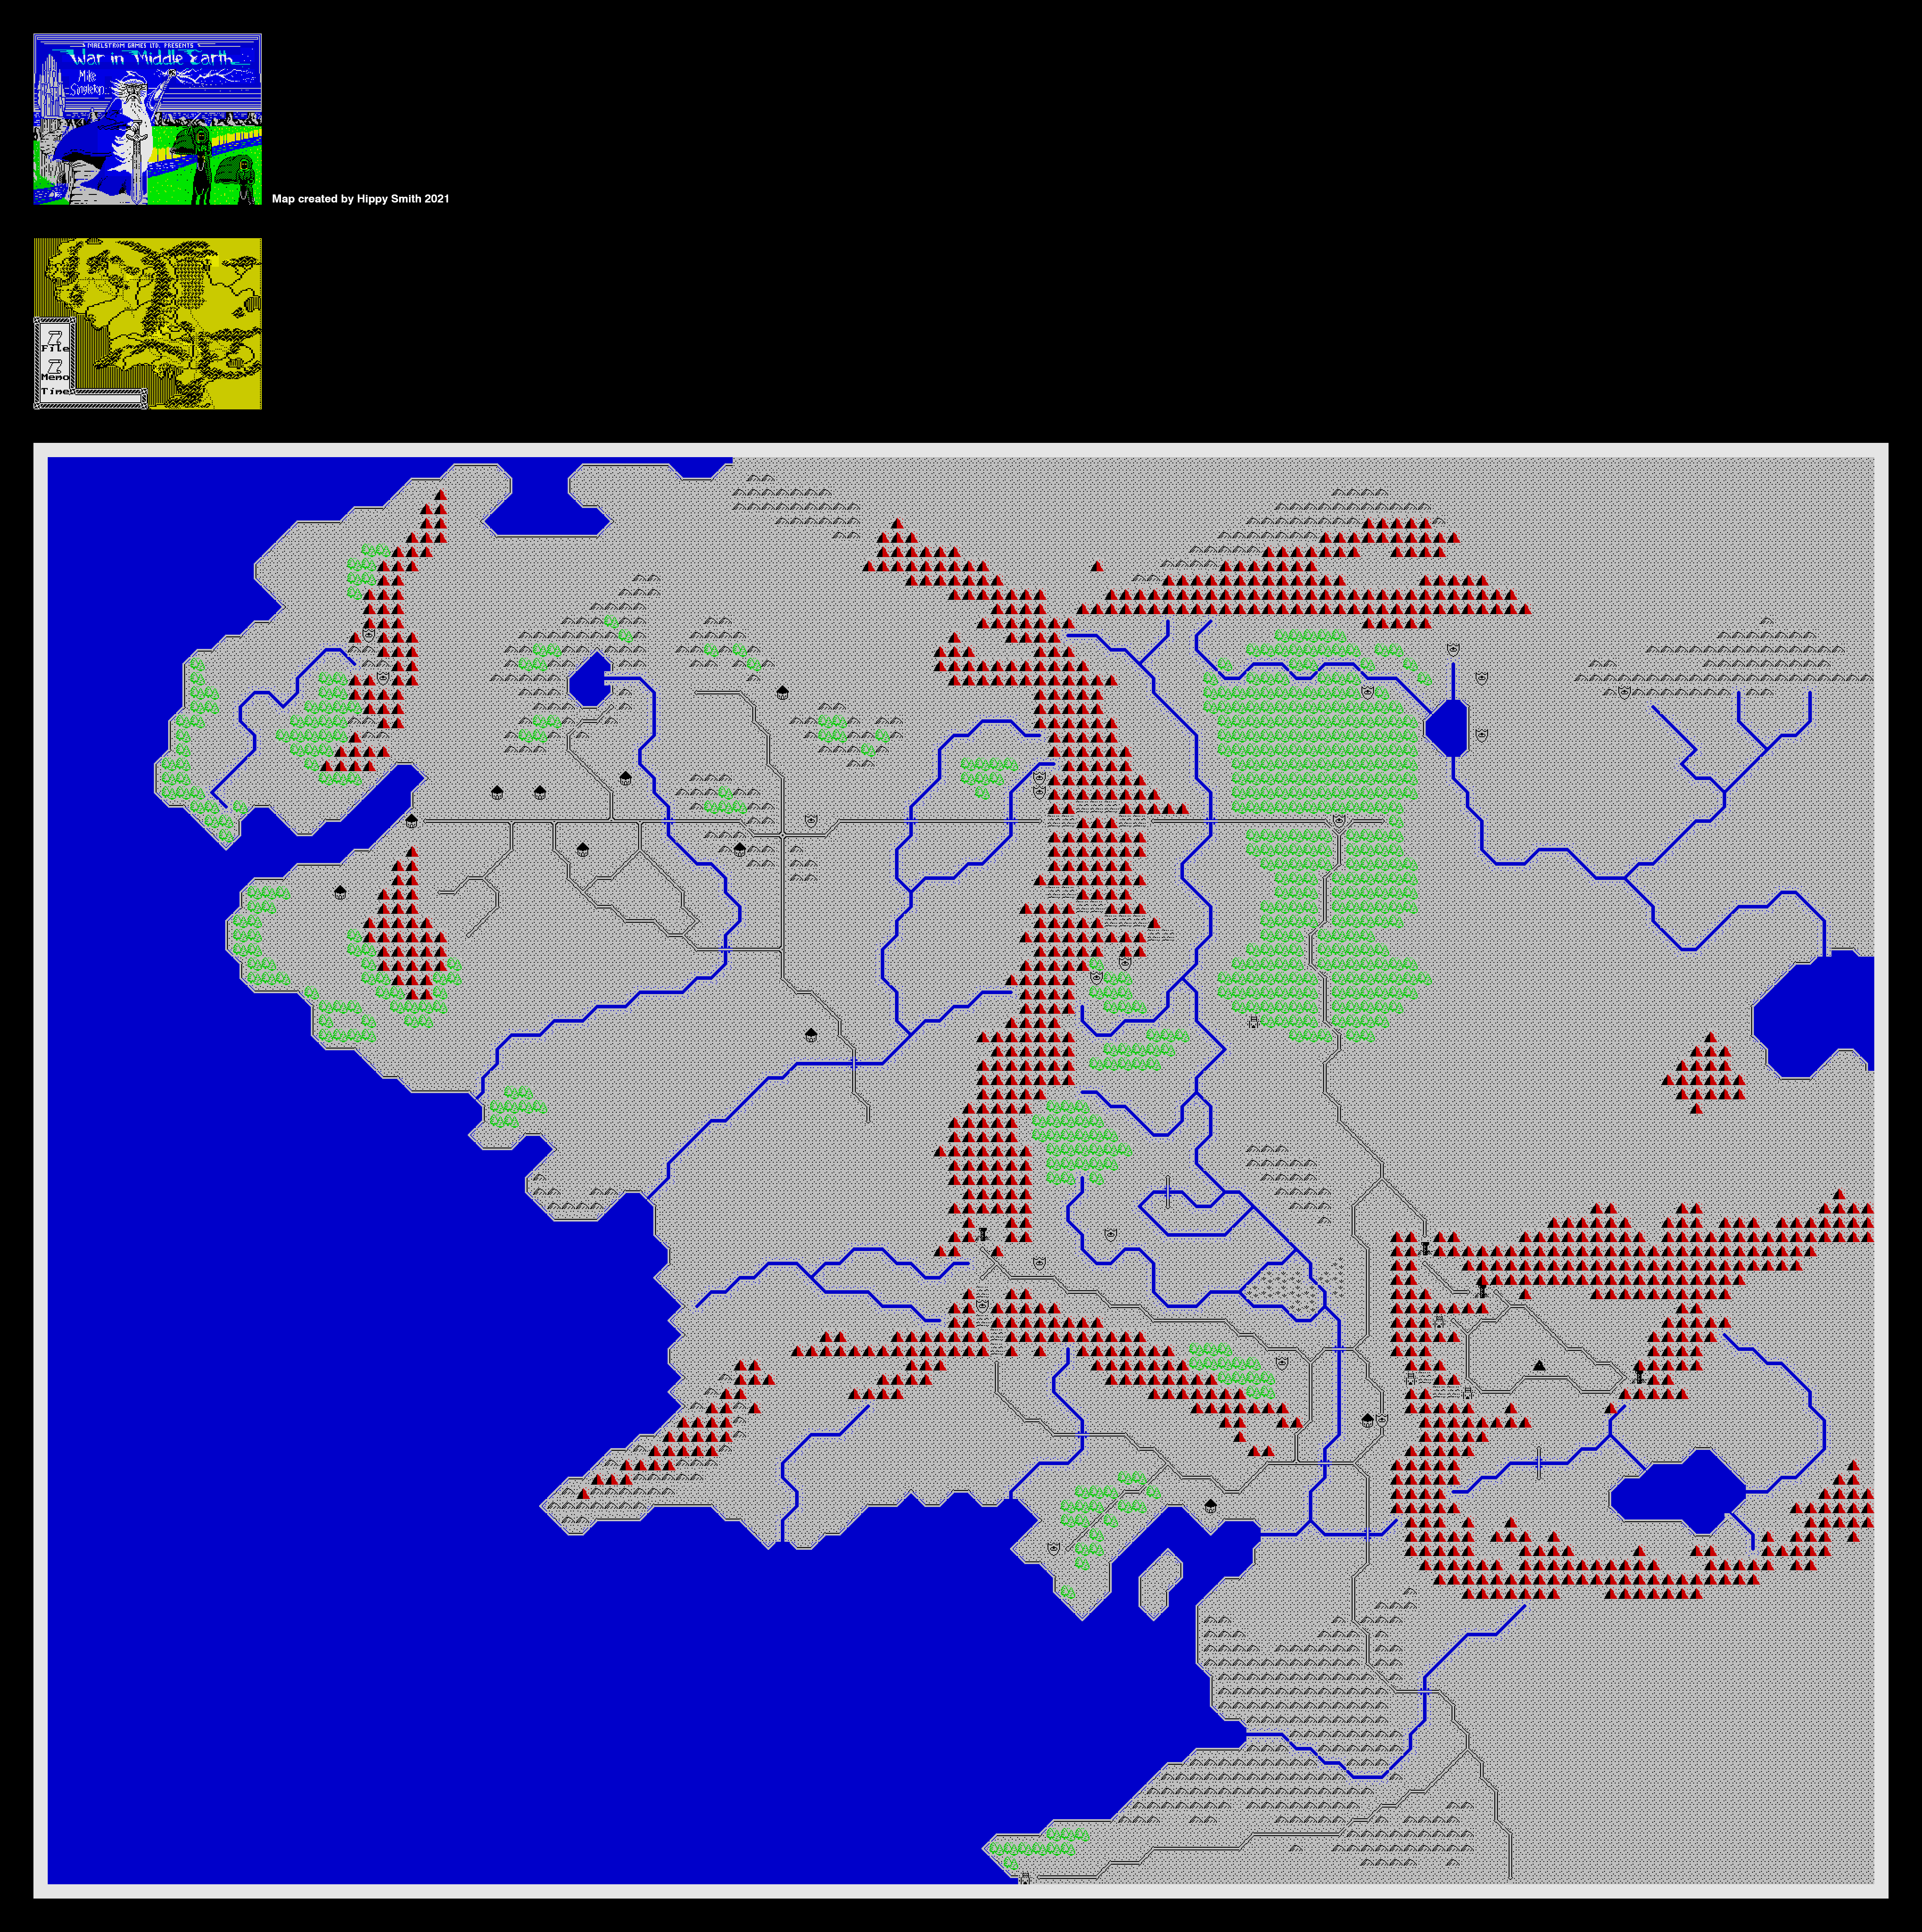 War in Middle Earth - The Map